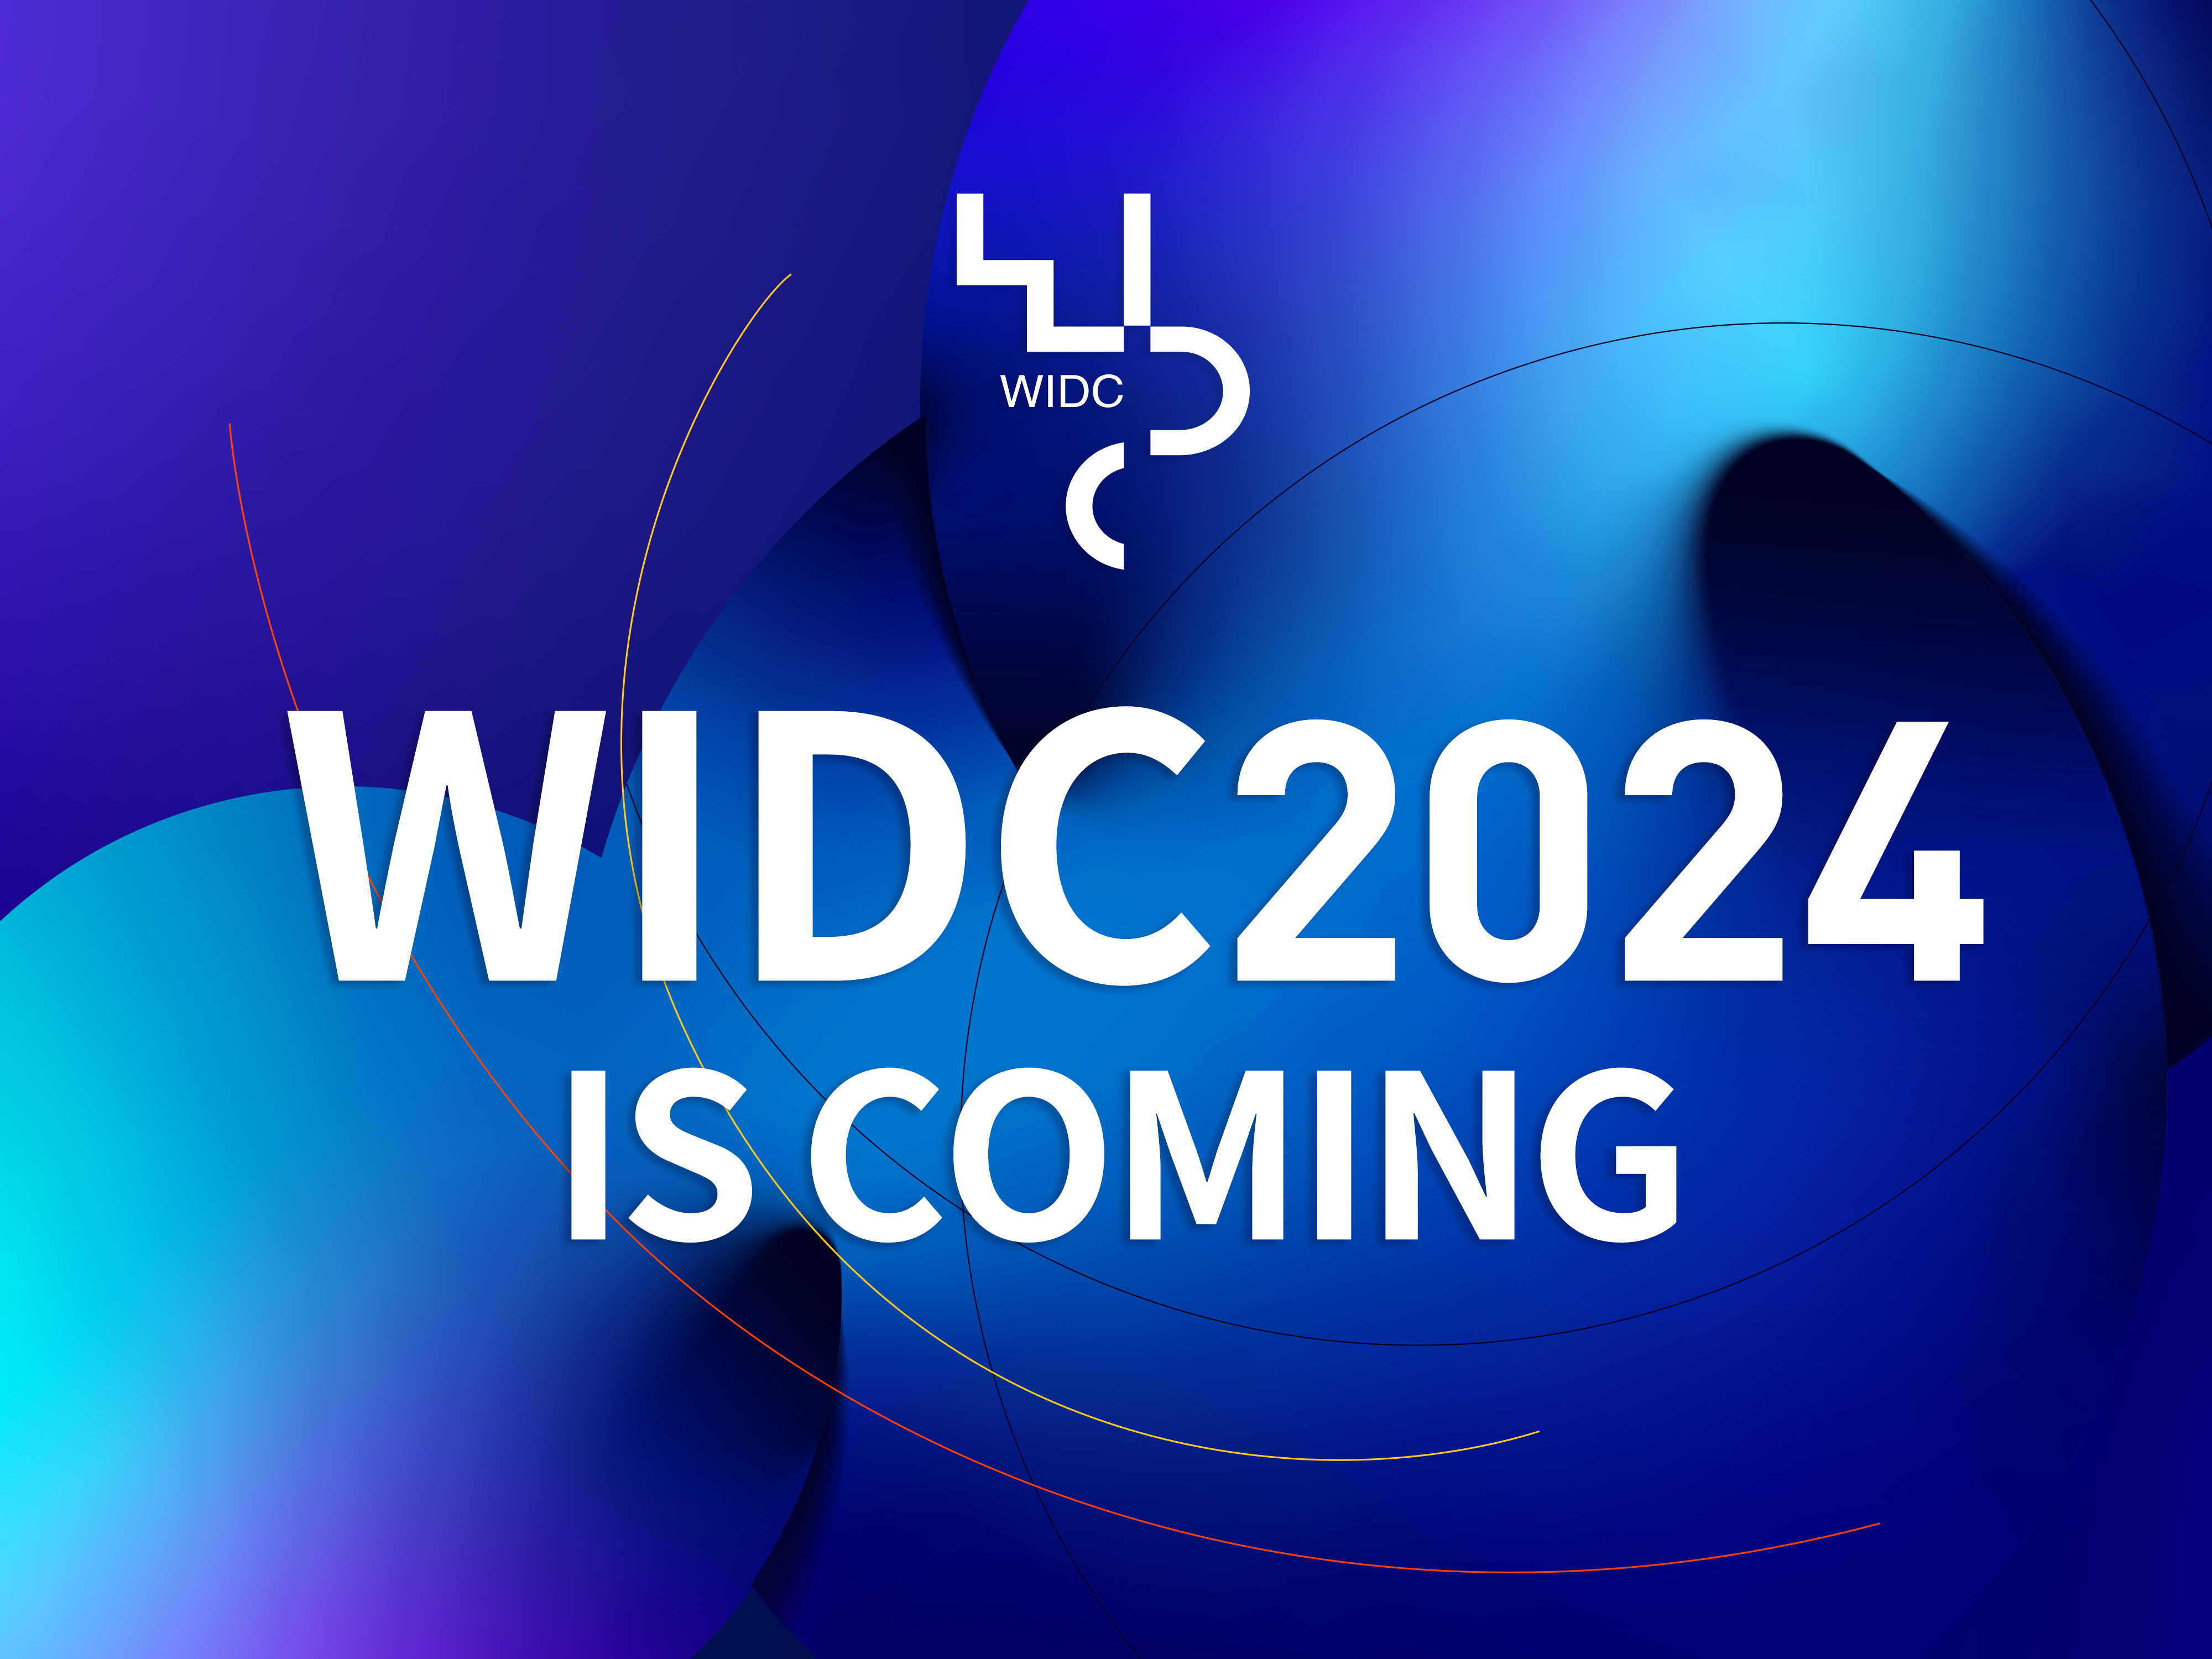 WIDC2024 IS COMING!